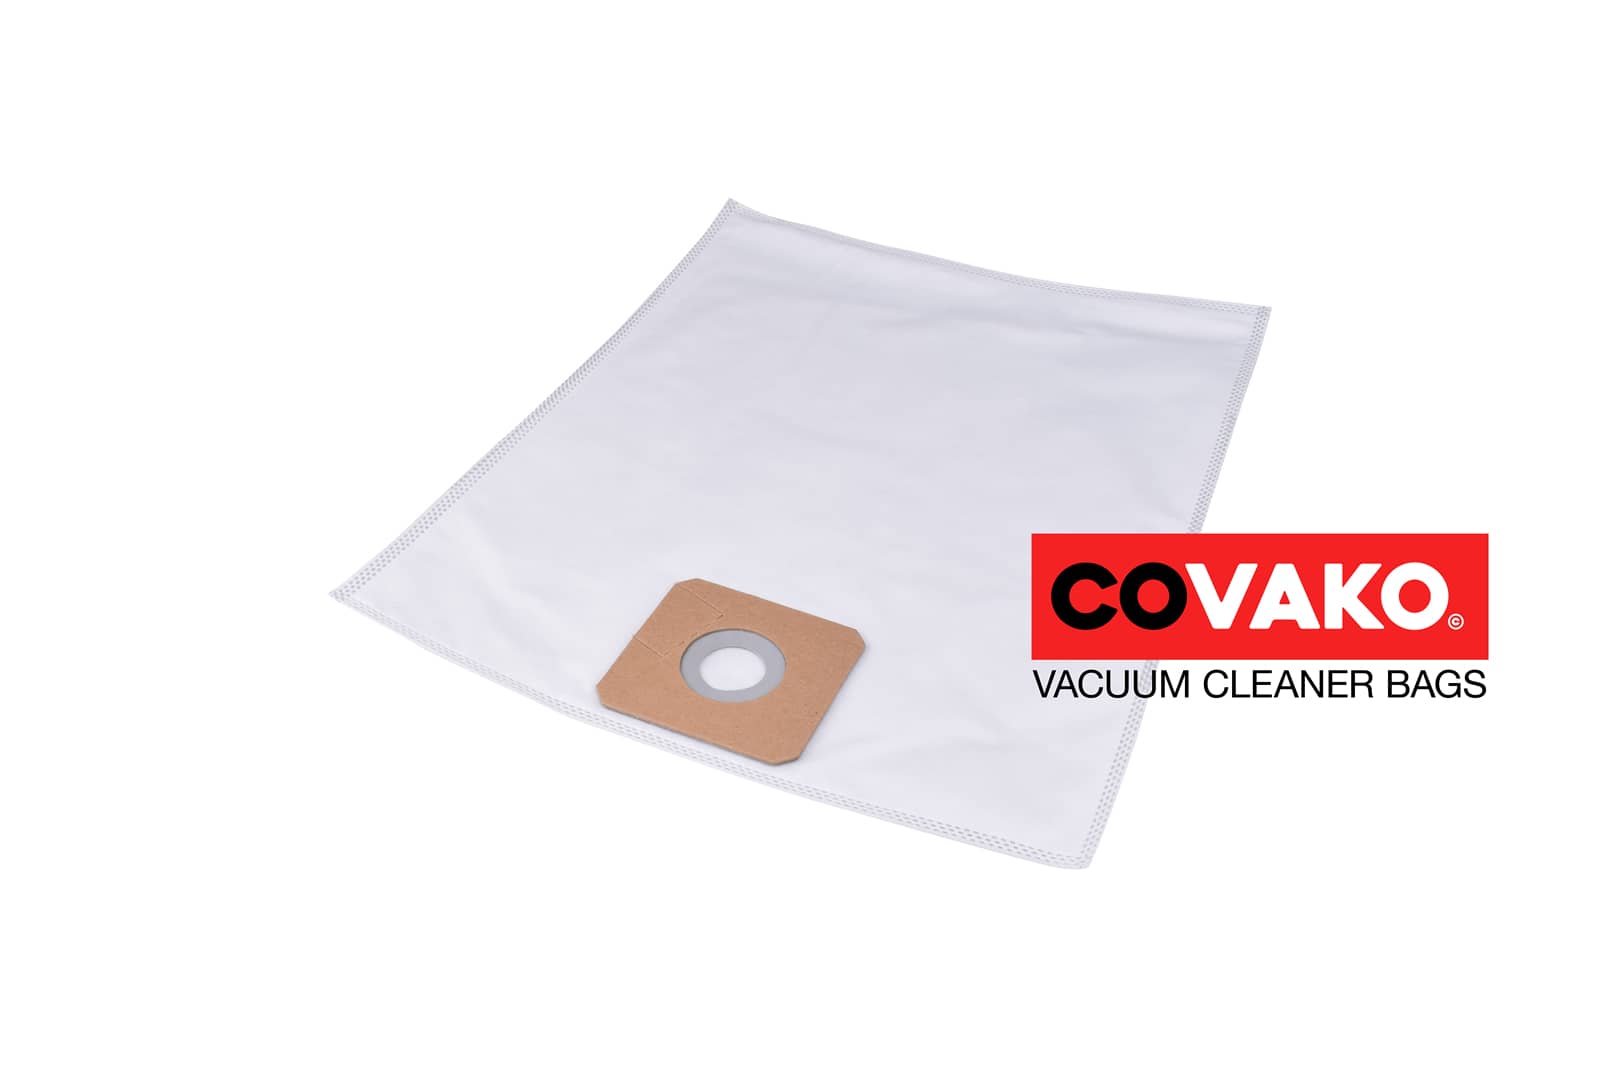 Vermop Jetvac SD 12 D / Synthesis - Vermop vacuum cleaner bags